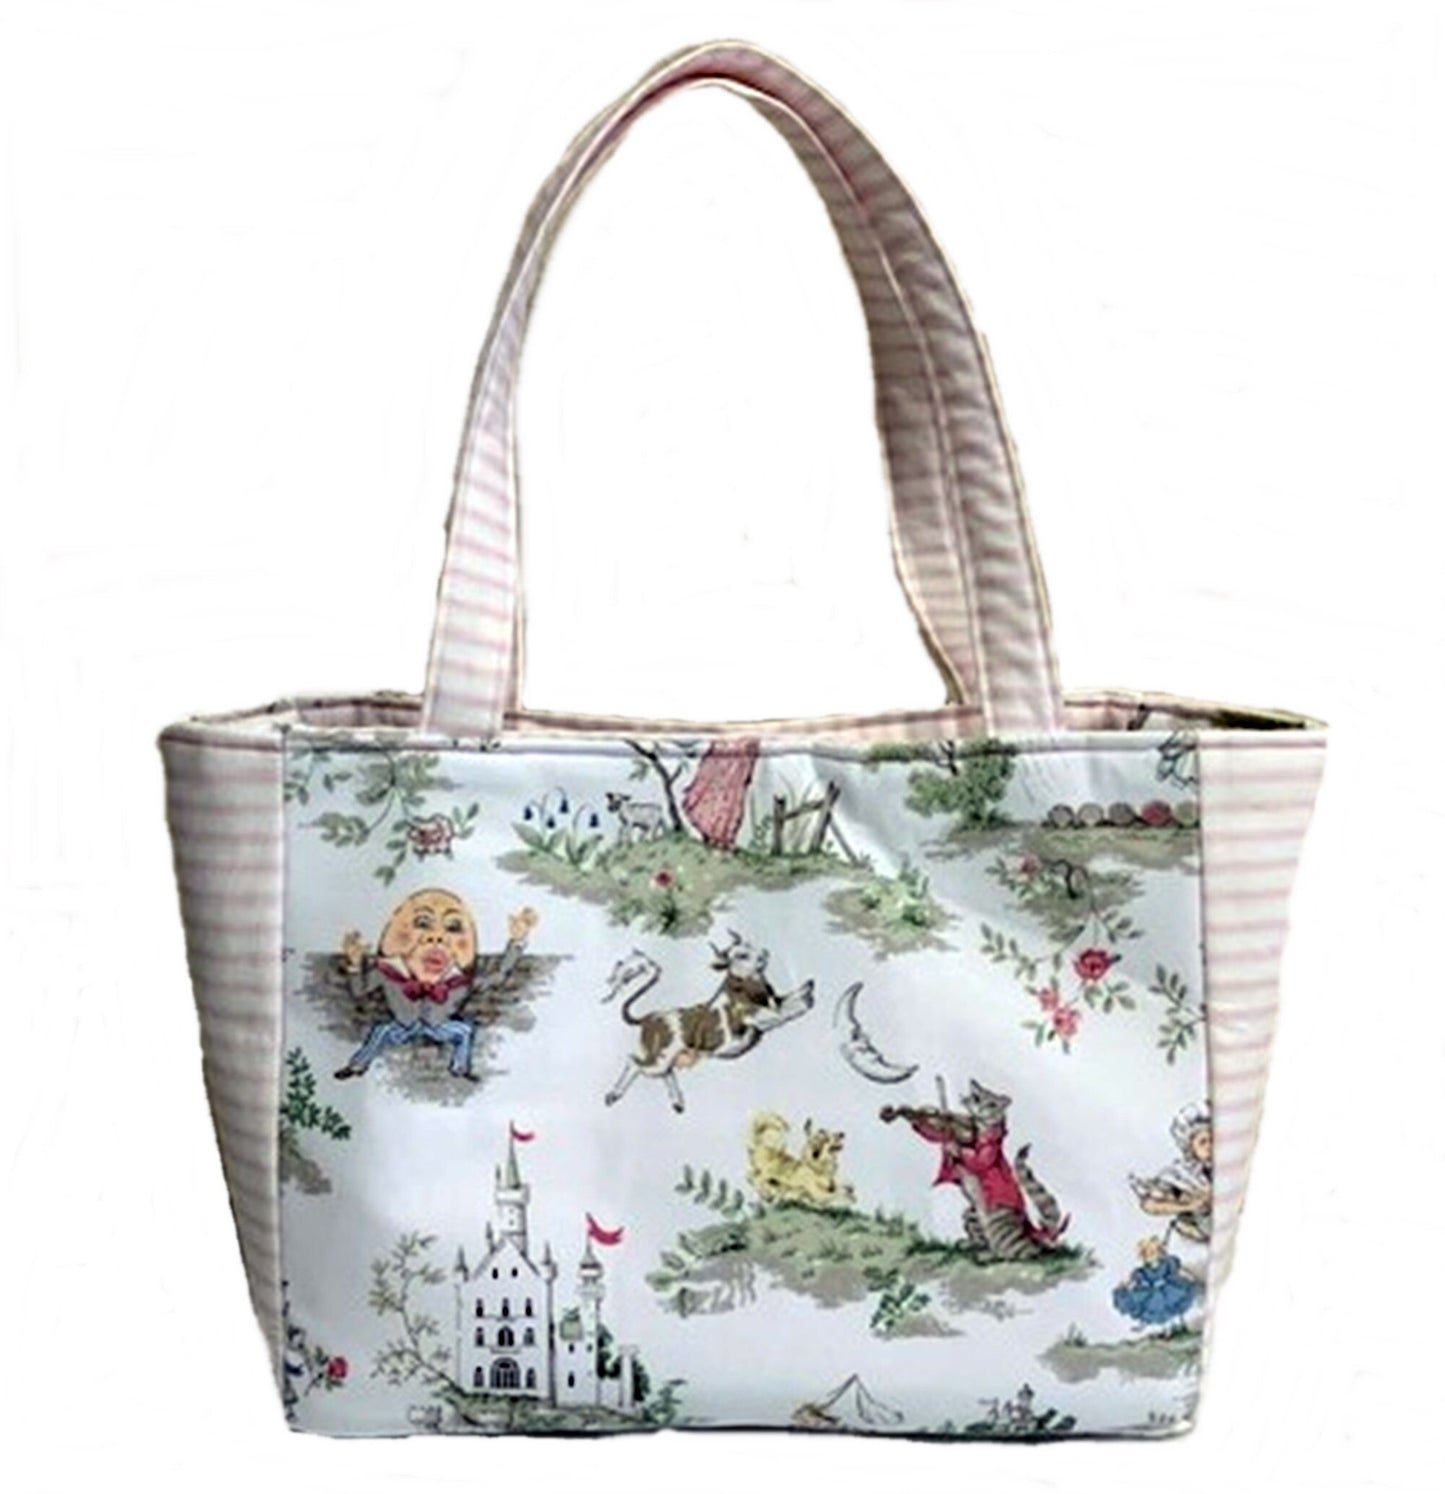 Over the Moon Nursery Rhyme Toile | Diaper Bag Tote | Large Diaperbag Boxy Style